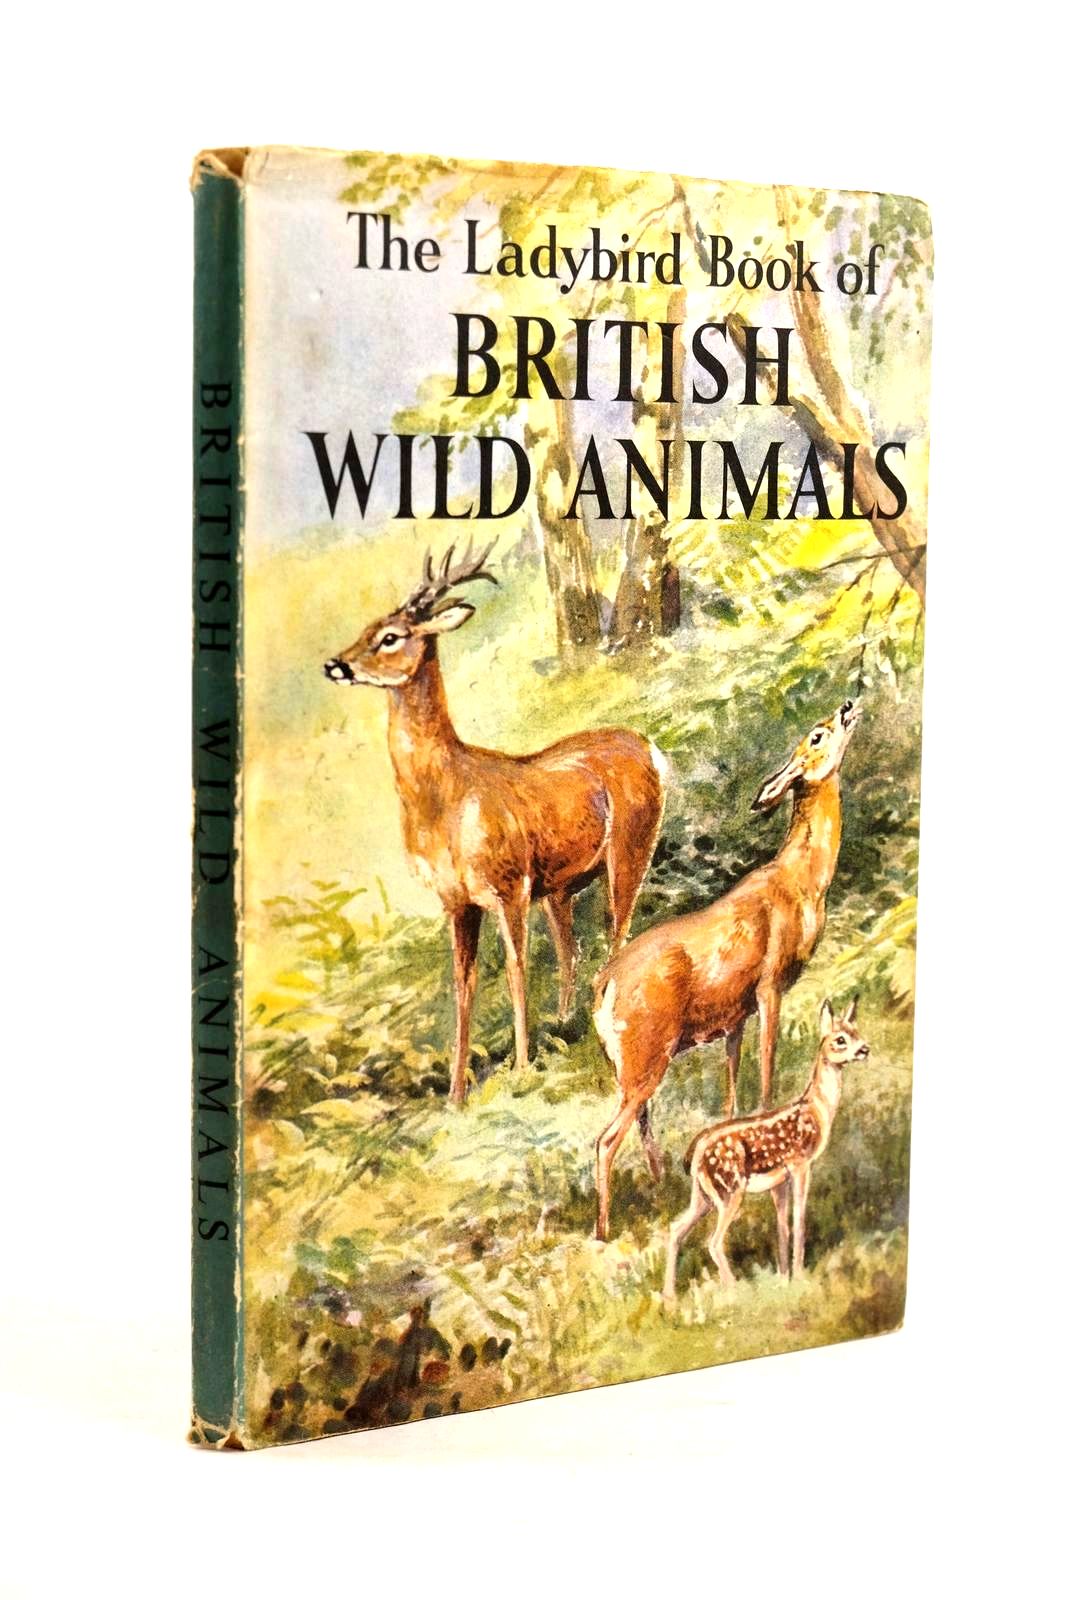 Photo of THE LADYBIRD BOOK OF BRITISH WILD ANIMALS written by Cansdale, George illustrated by Green, Roland published by Wills &amp; Hepworth Ltd. (STOCK CODE: 1320631)  for sale by Stella & Rose's Books